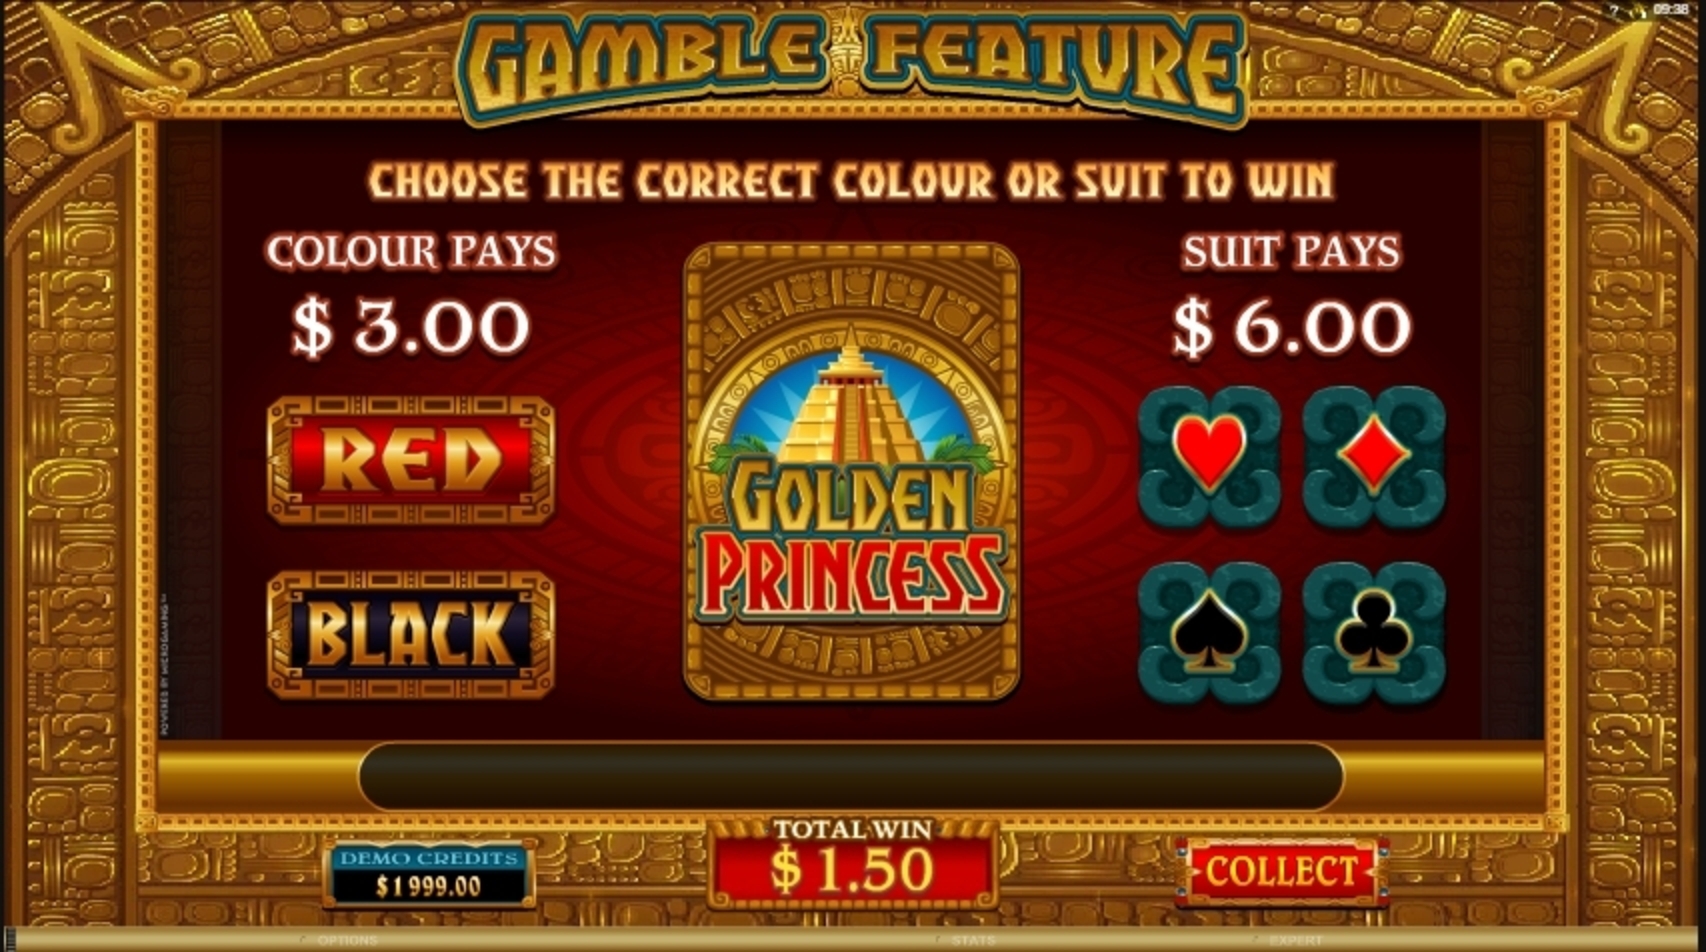 Info of Golden Princess Slot Game by Microgaming